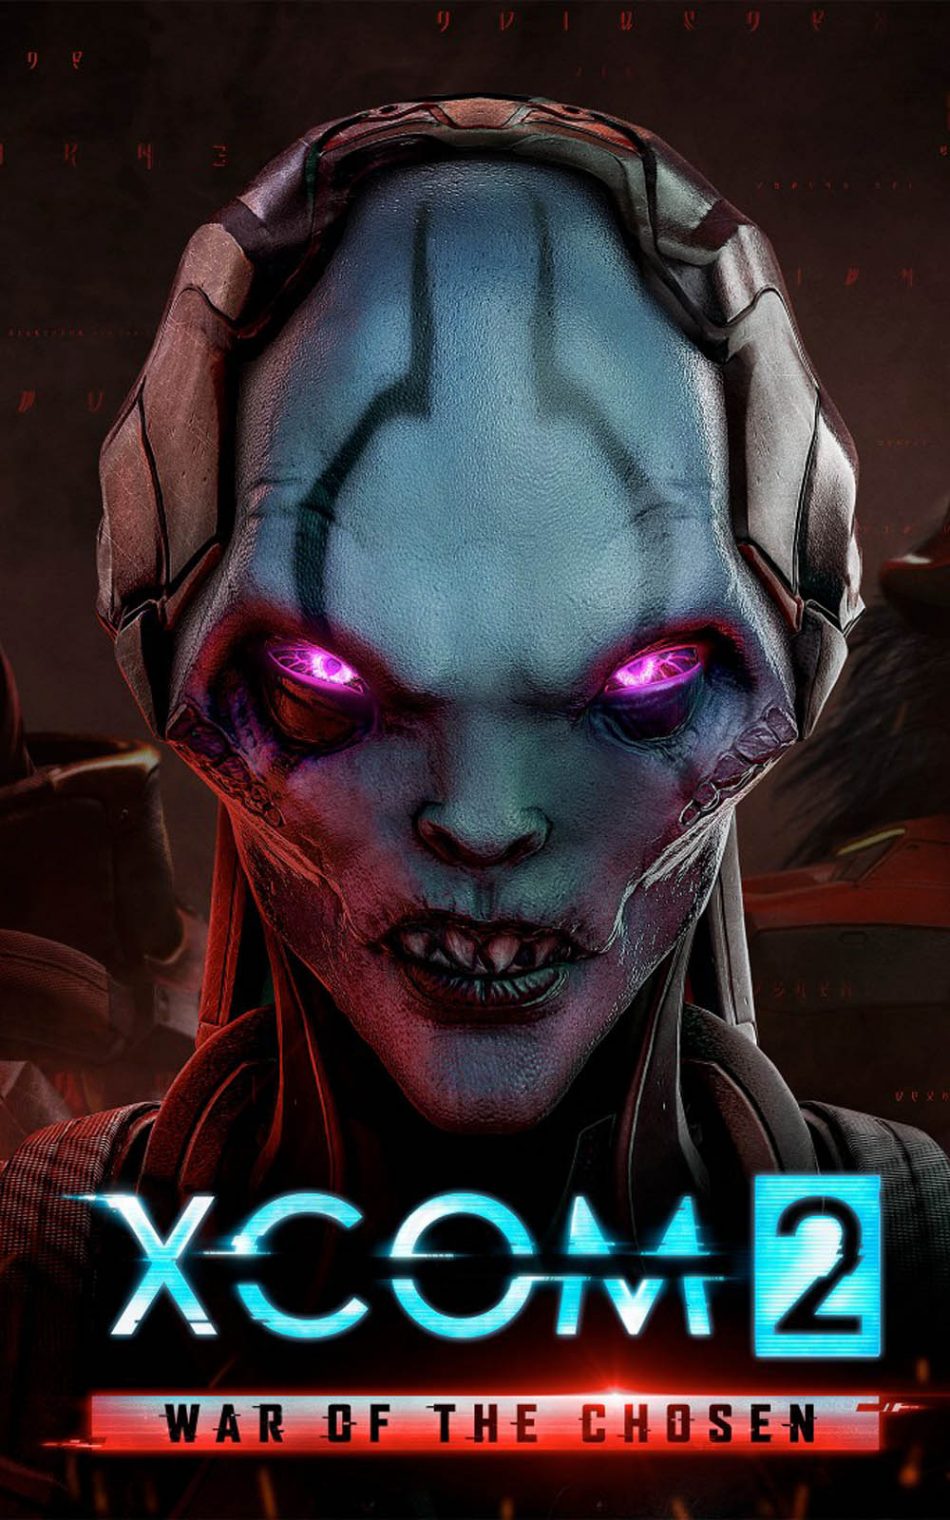 XCOM: Enemy Within XCOM 2: War of the Chosen XCOM: Enemy Unknown Xbox 360,  Xcom, game, computer Wallpaper, video Game png | PNGWing